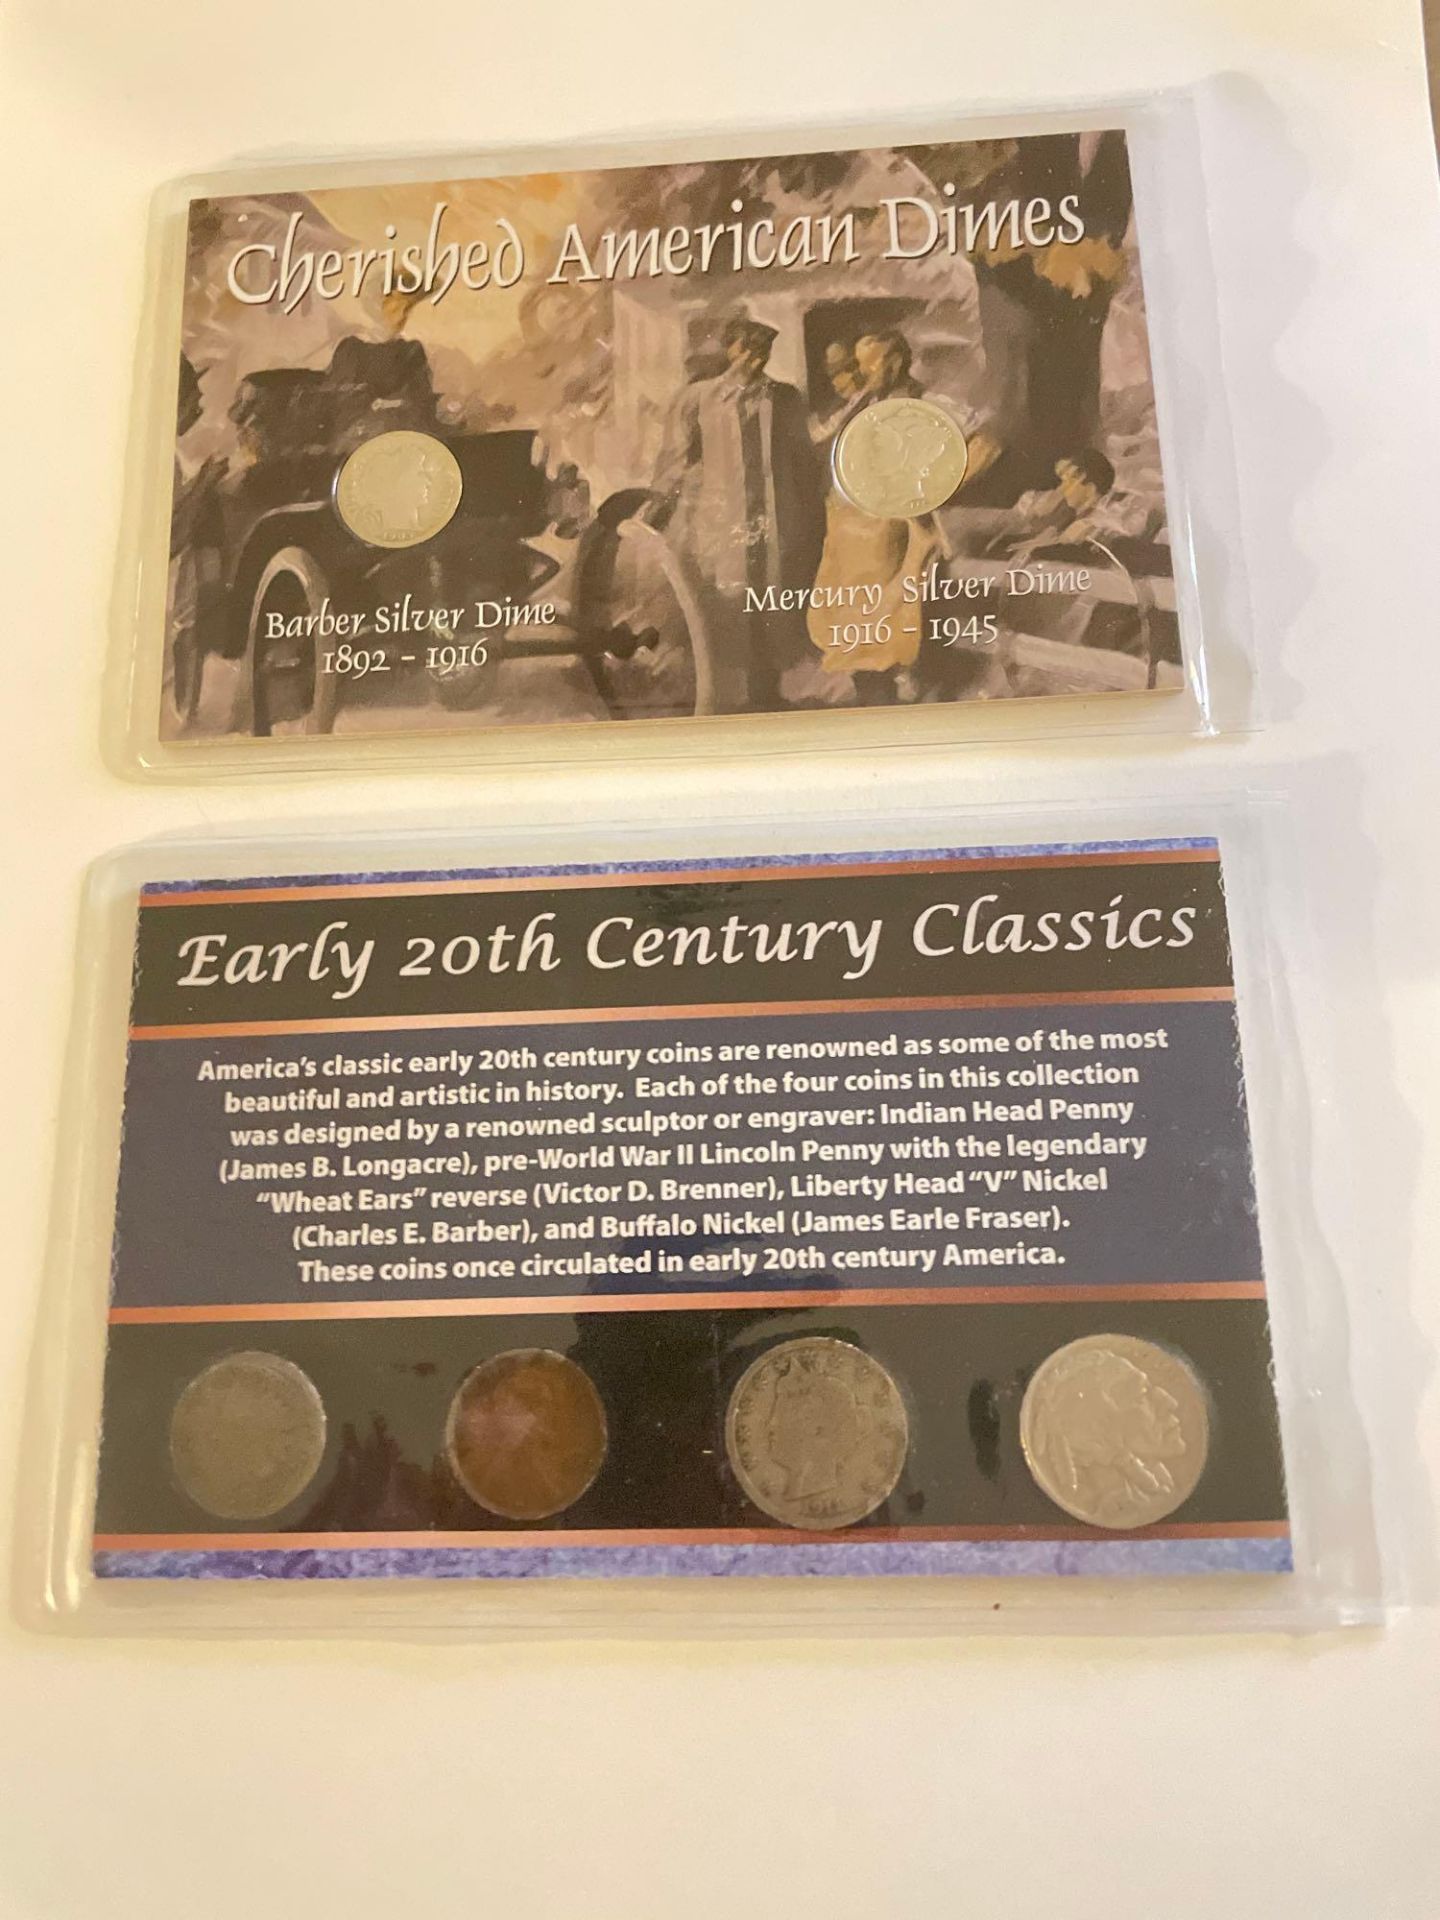 Early 20th Century Classics & Cherished American Dimes